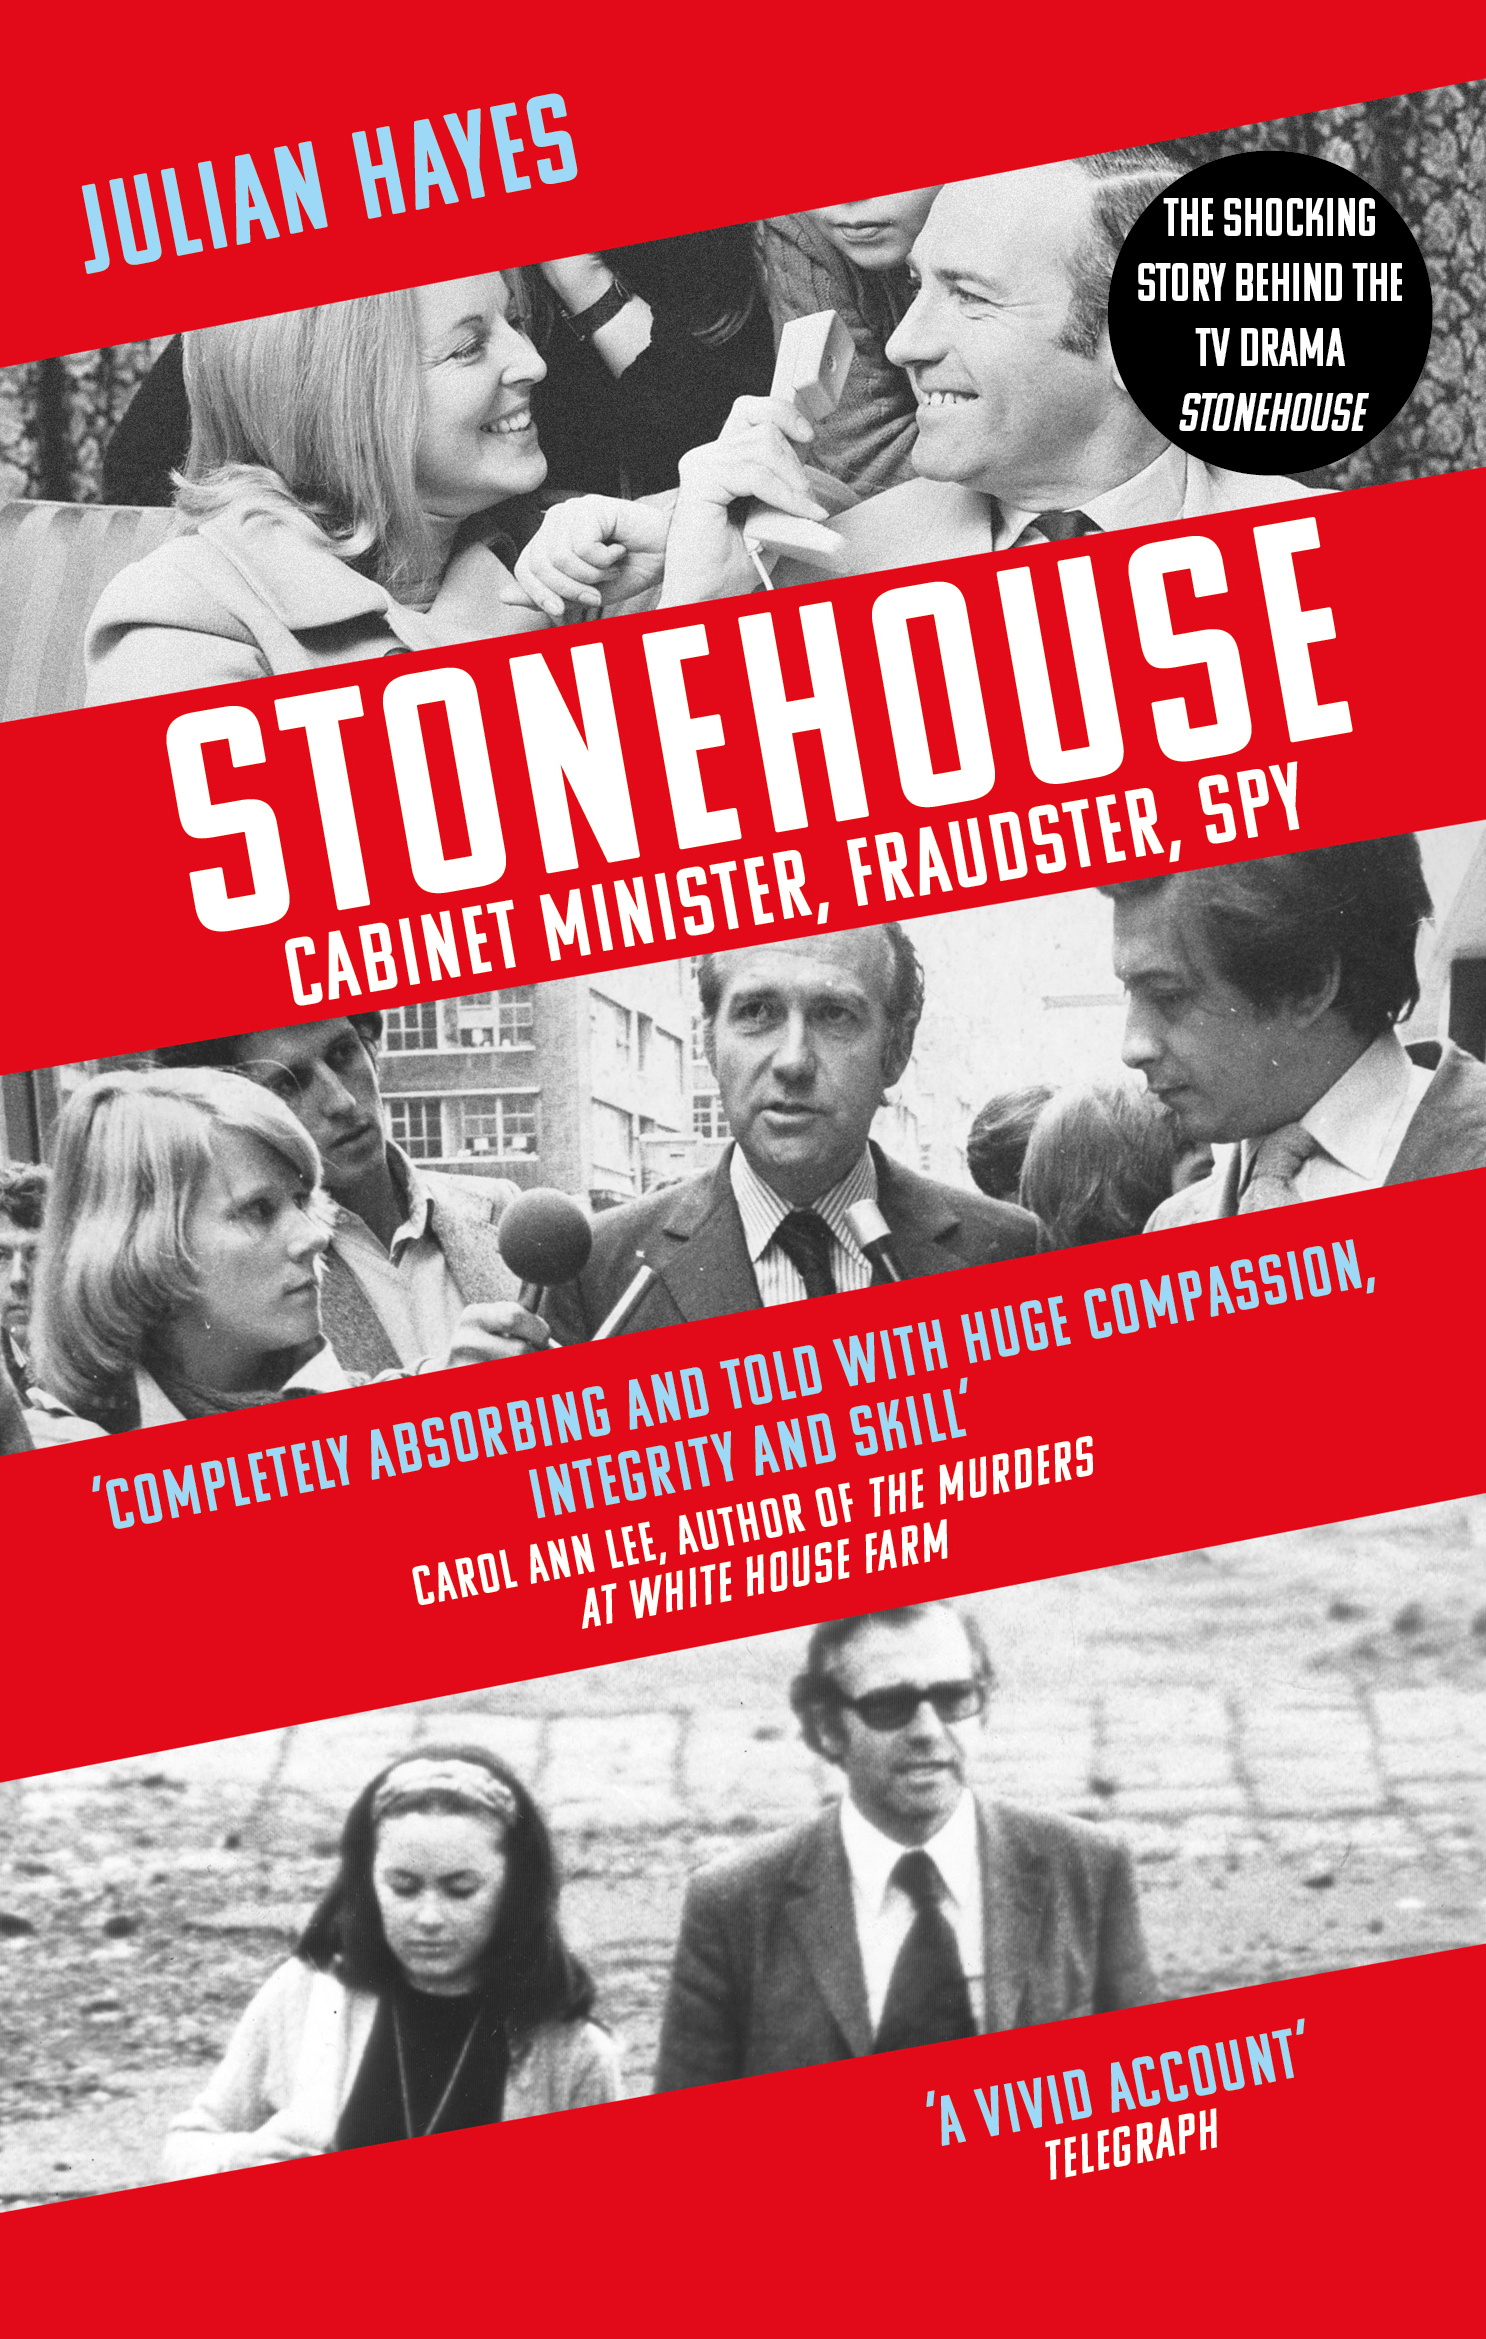 The front cover of the book, Stonehouse: Cabinet Minister, Fraudster, Spy, by Julian Hayes